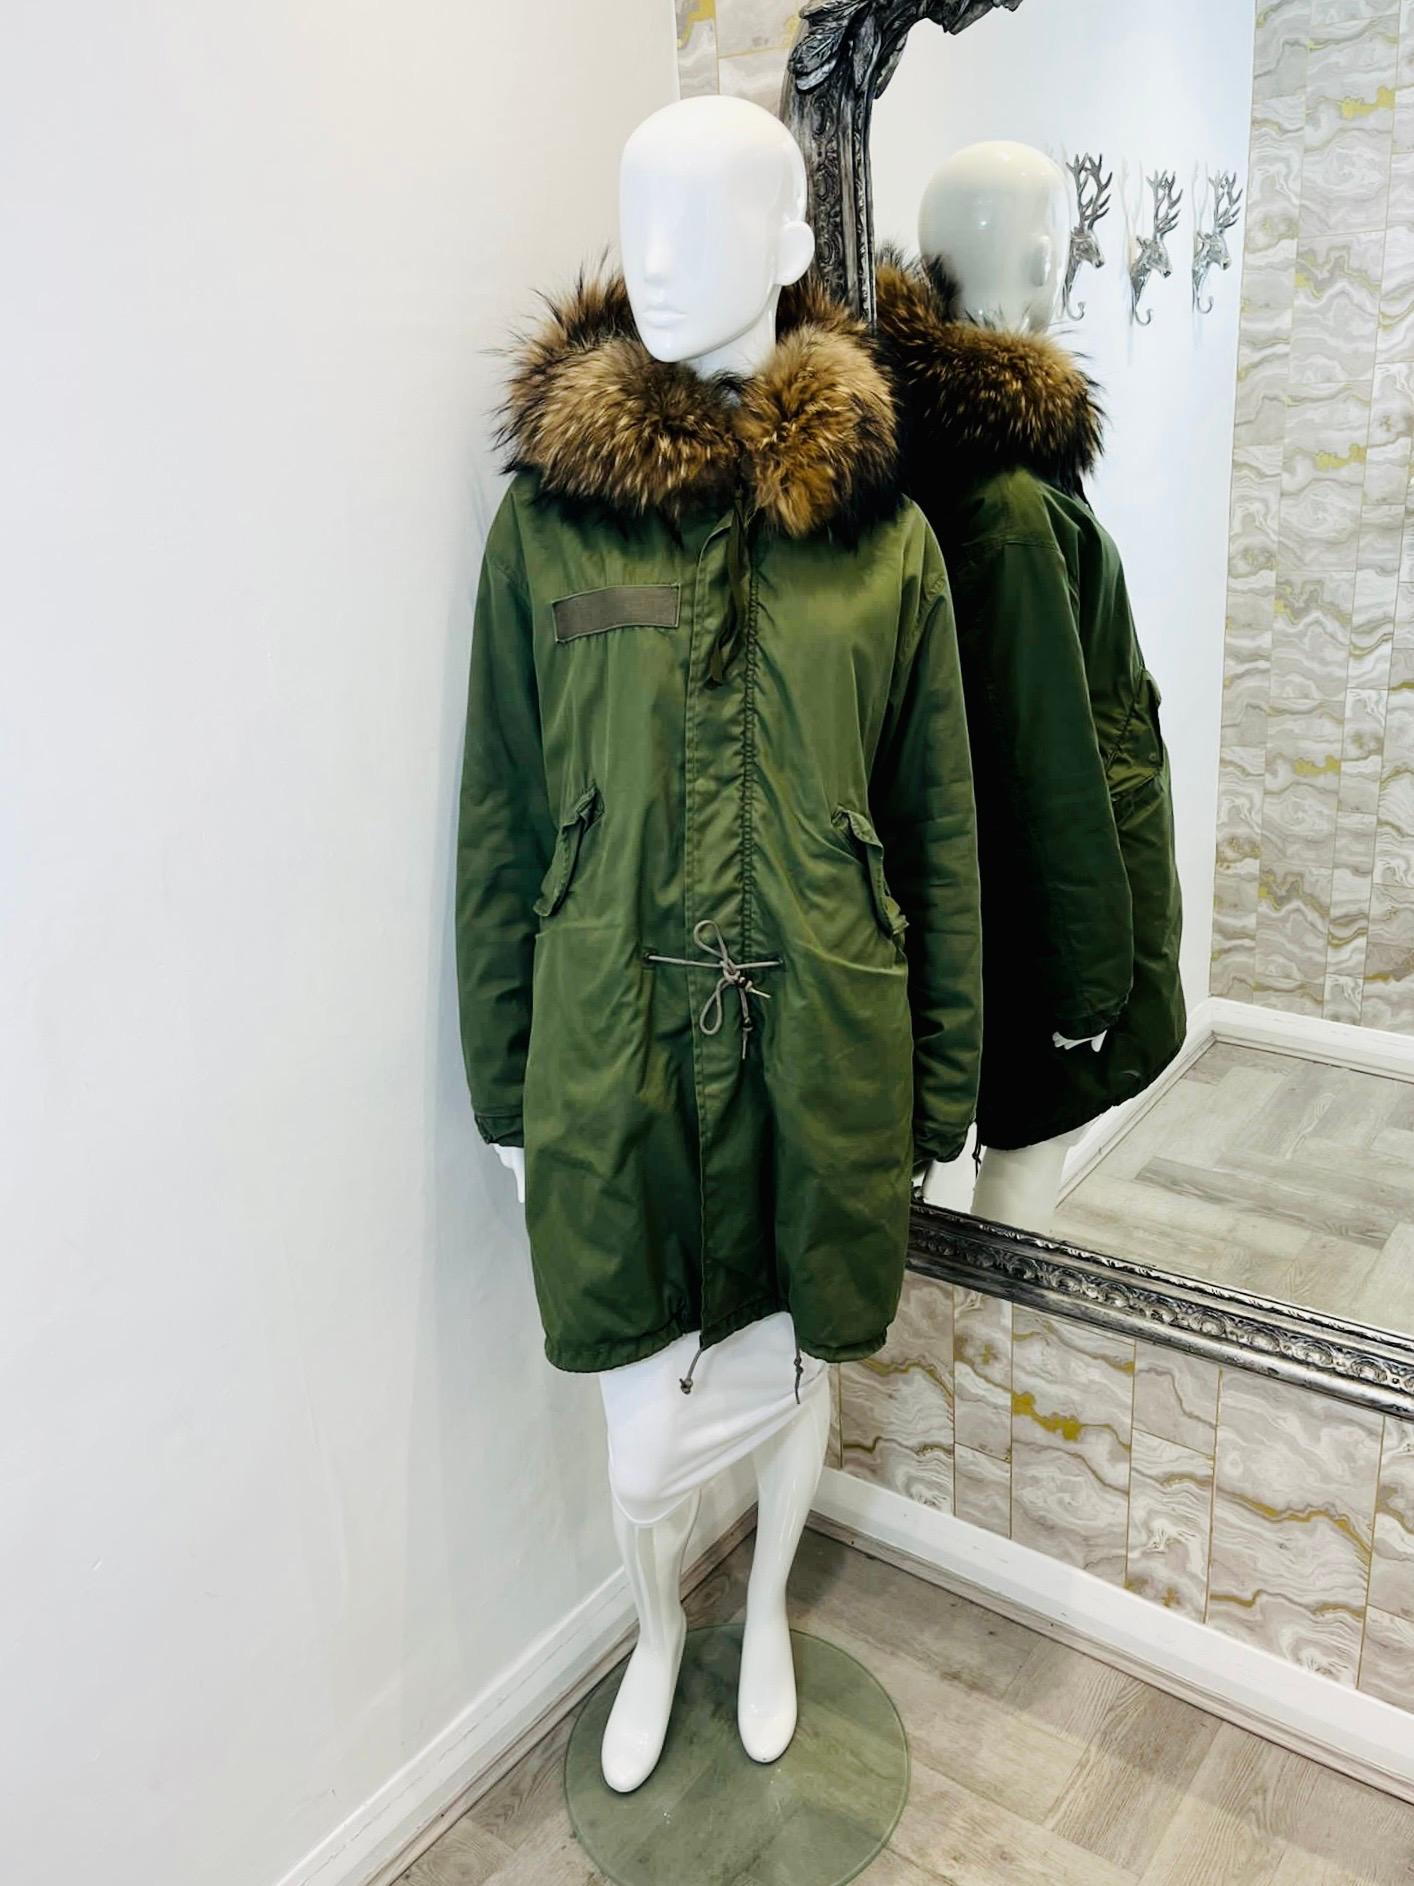 Mr & Mrs Italy Fur Parka

Dark khaki parka, long line fit which is fully lined with Rabbit fur 

and the hood is trimmed with Racoon Fur.

Size - M

Condition - Good (Some of the fur joins on the lining have wear)

Composition - Cotton, Racoon Fur,